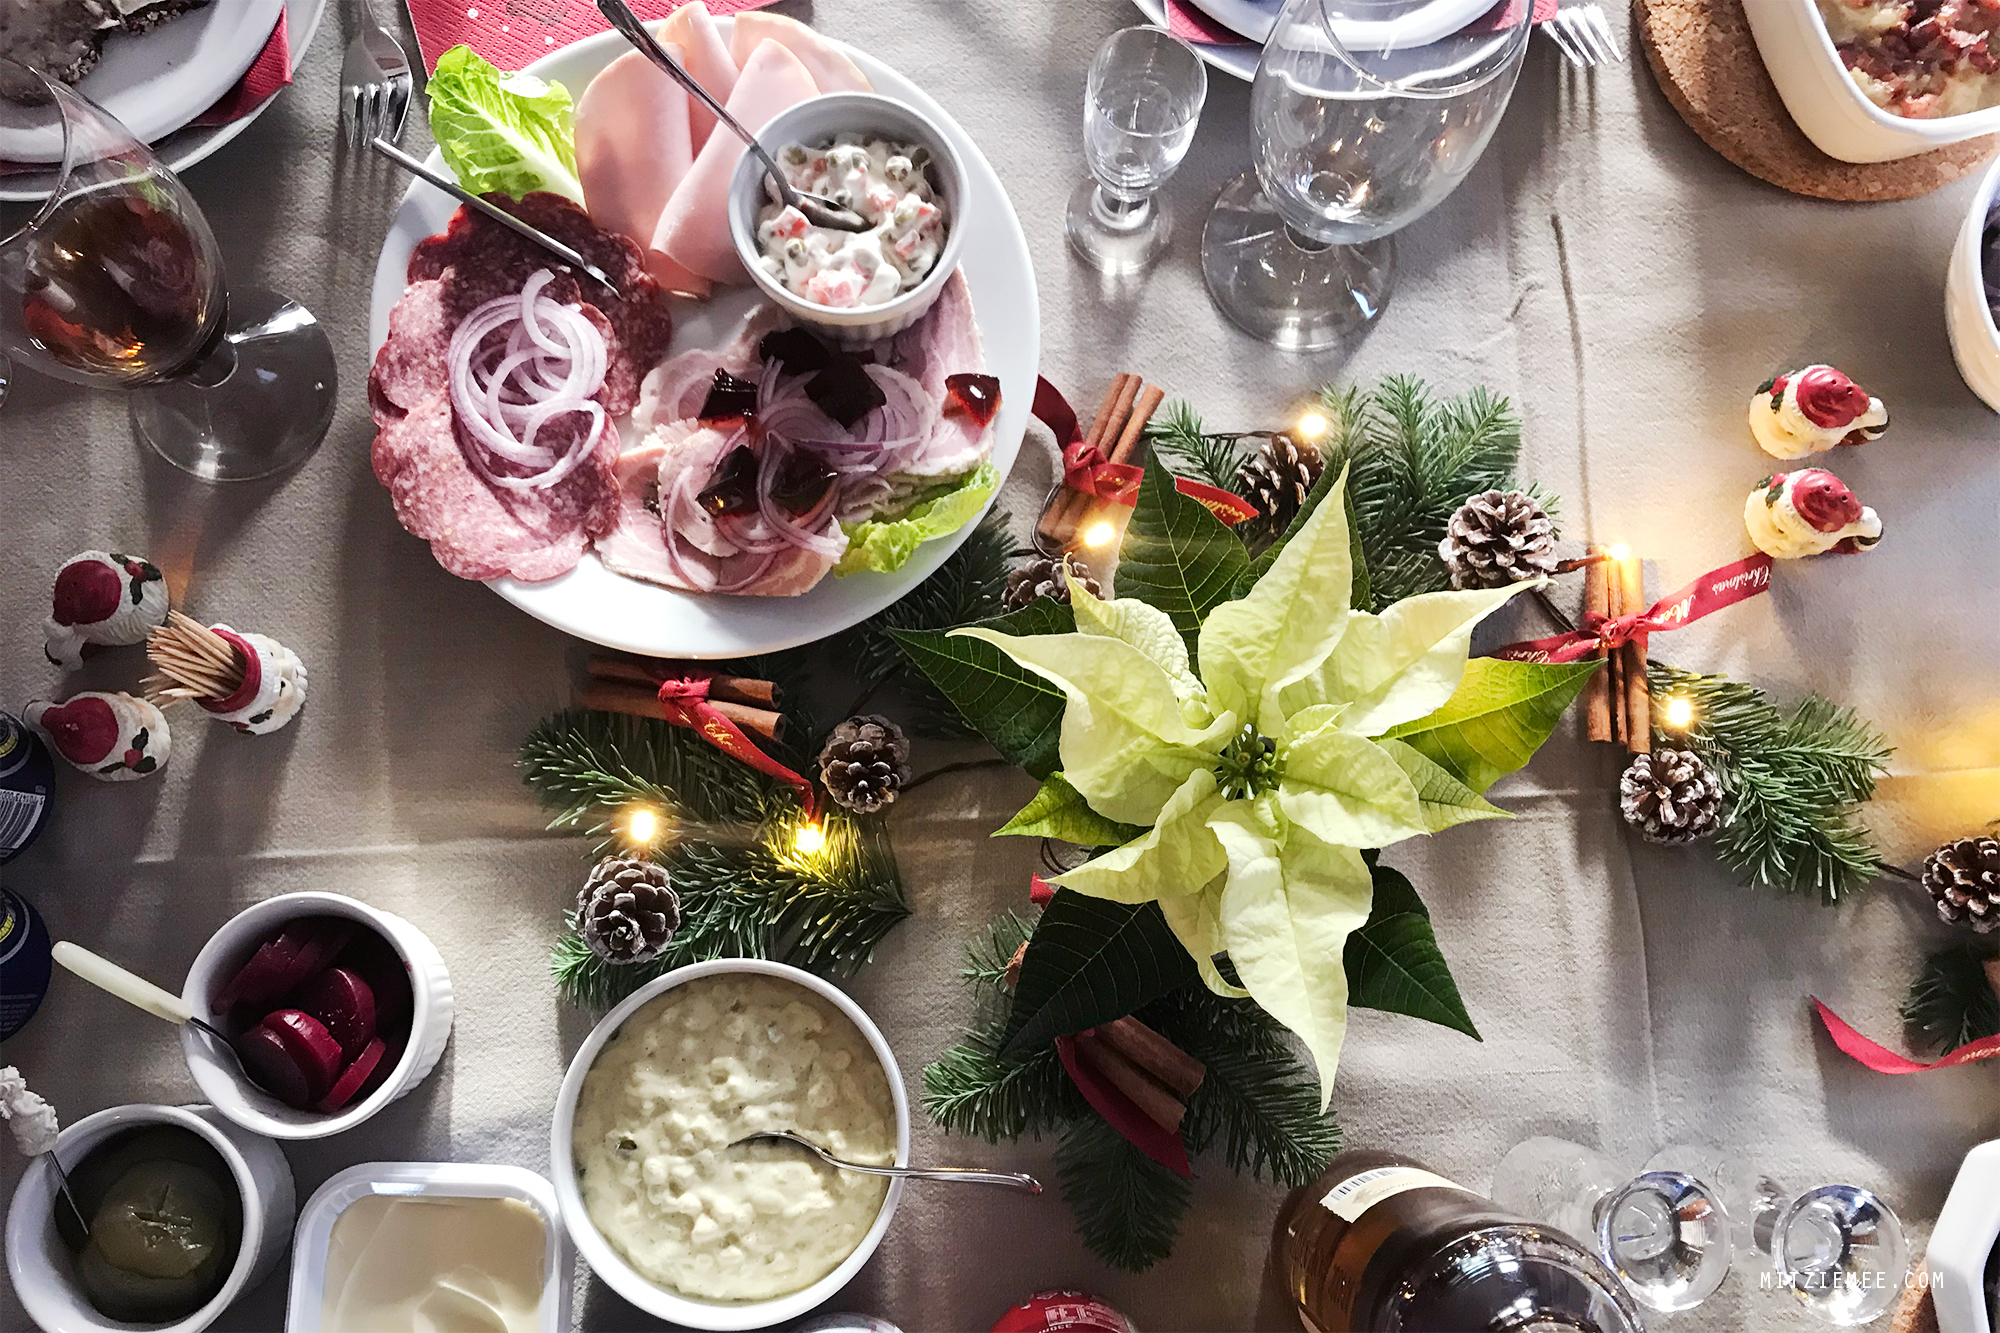 Julefrokost, the Danish Christmas Party